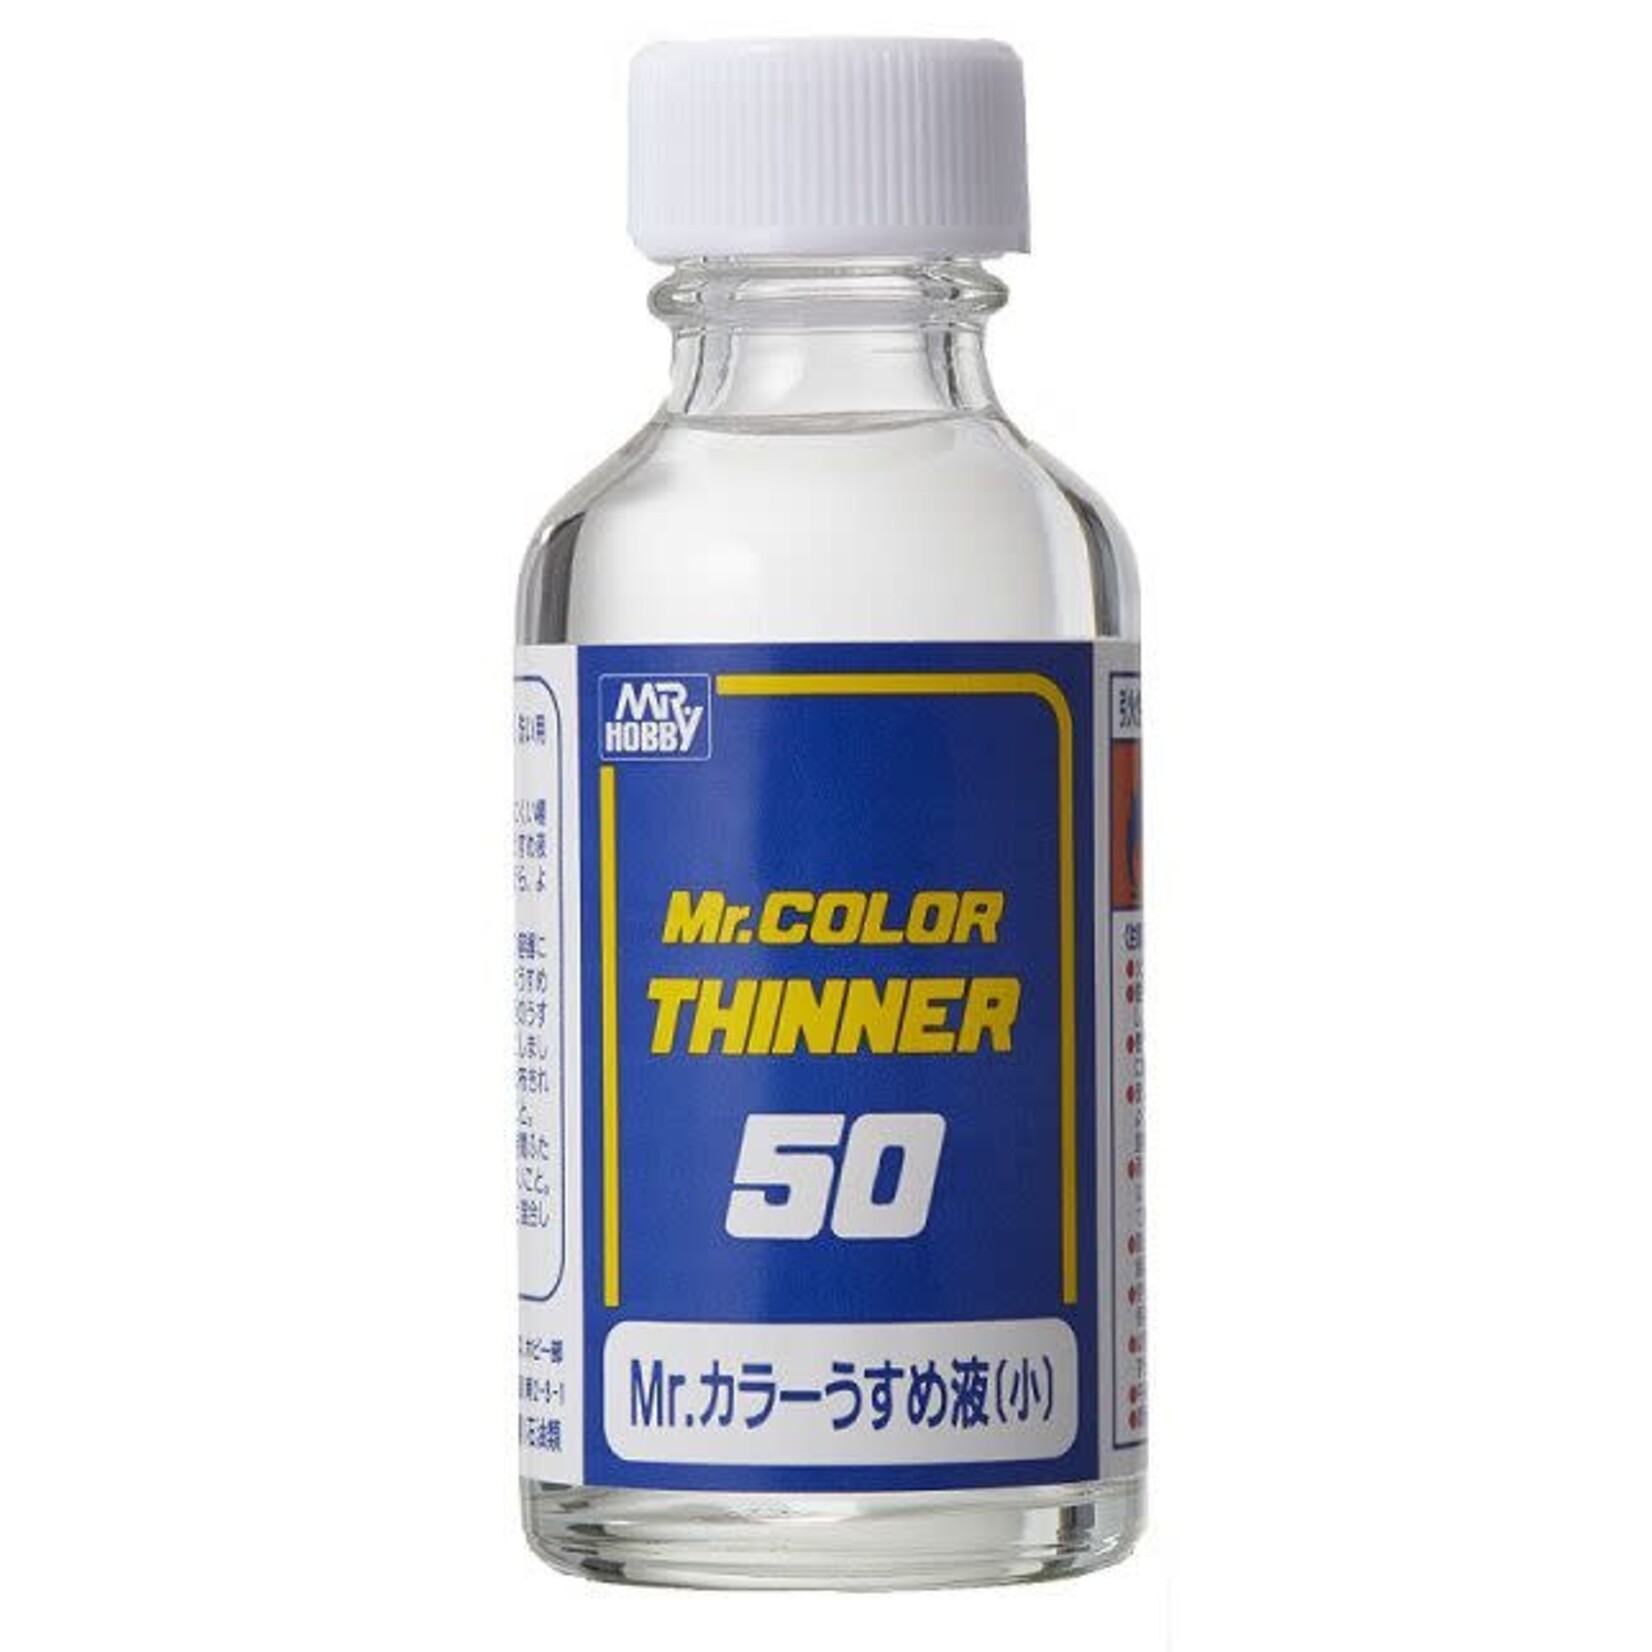 GSI Creos GNZ-T101 Mr Color T101 Thinner - 50ml Bottle